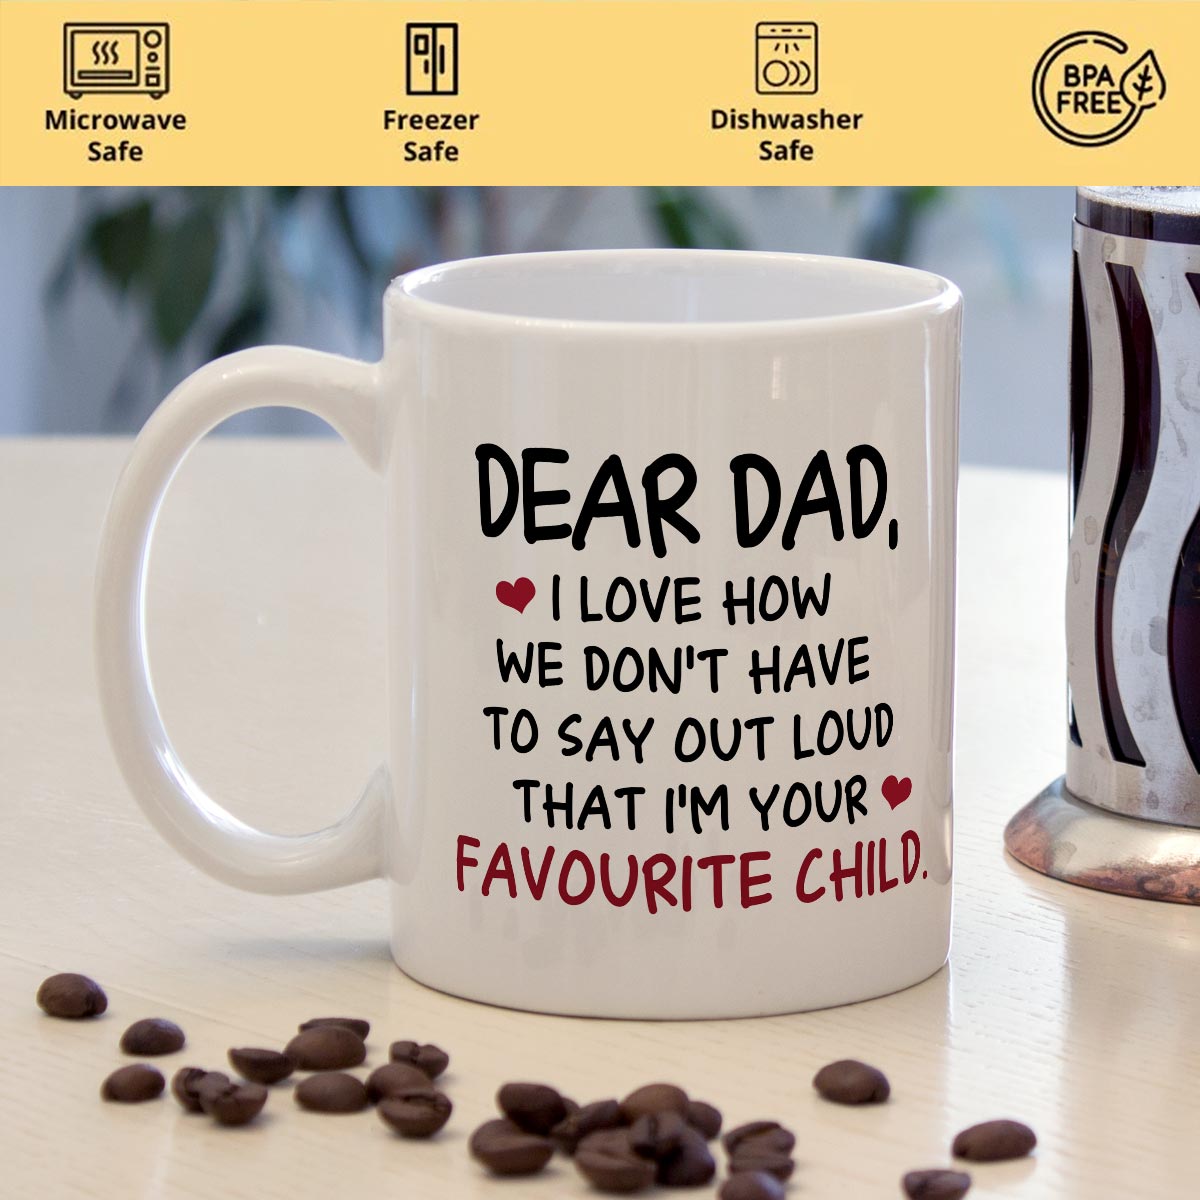 33 Brilliant Birthday Gifts For Your Dad That Are Guaranteed To Make His Day